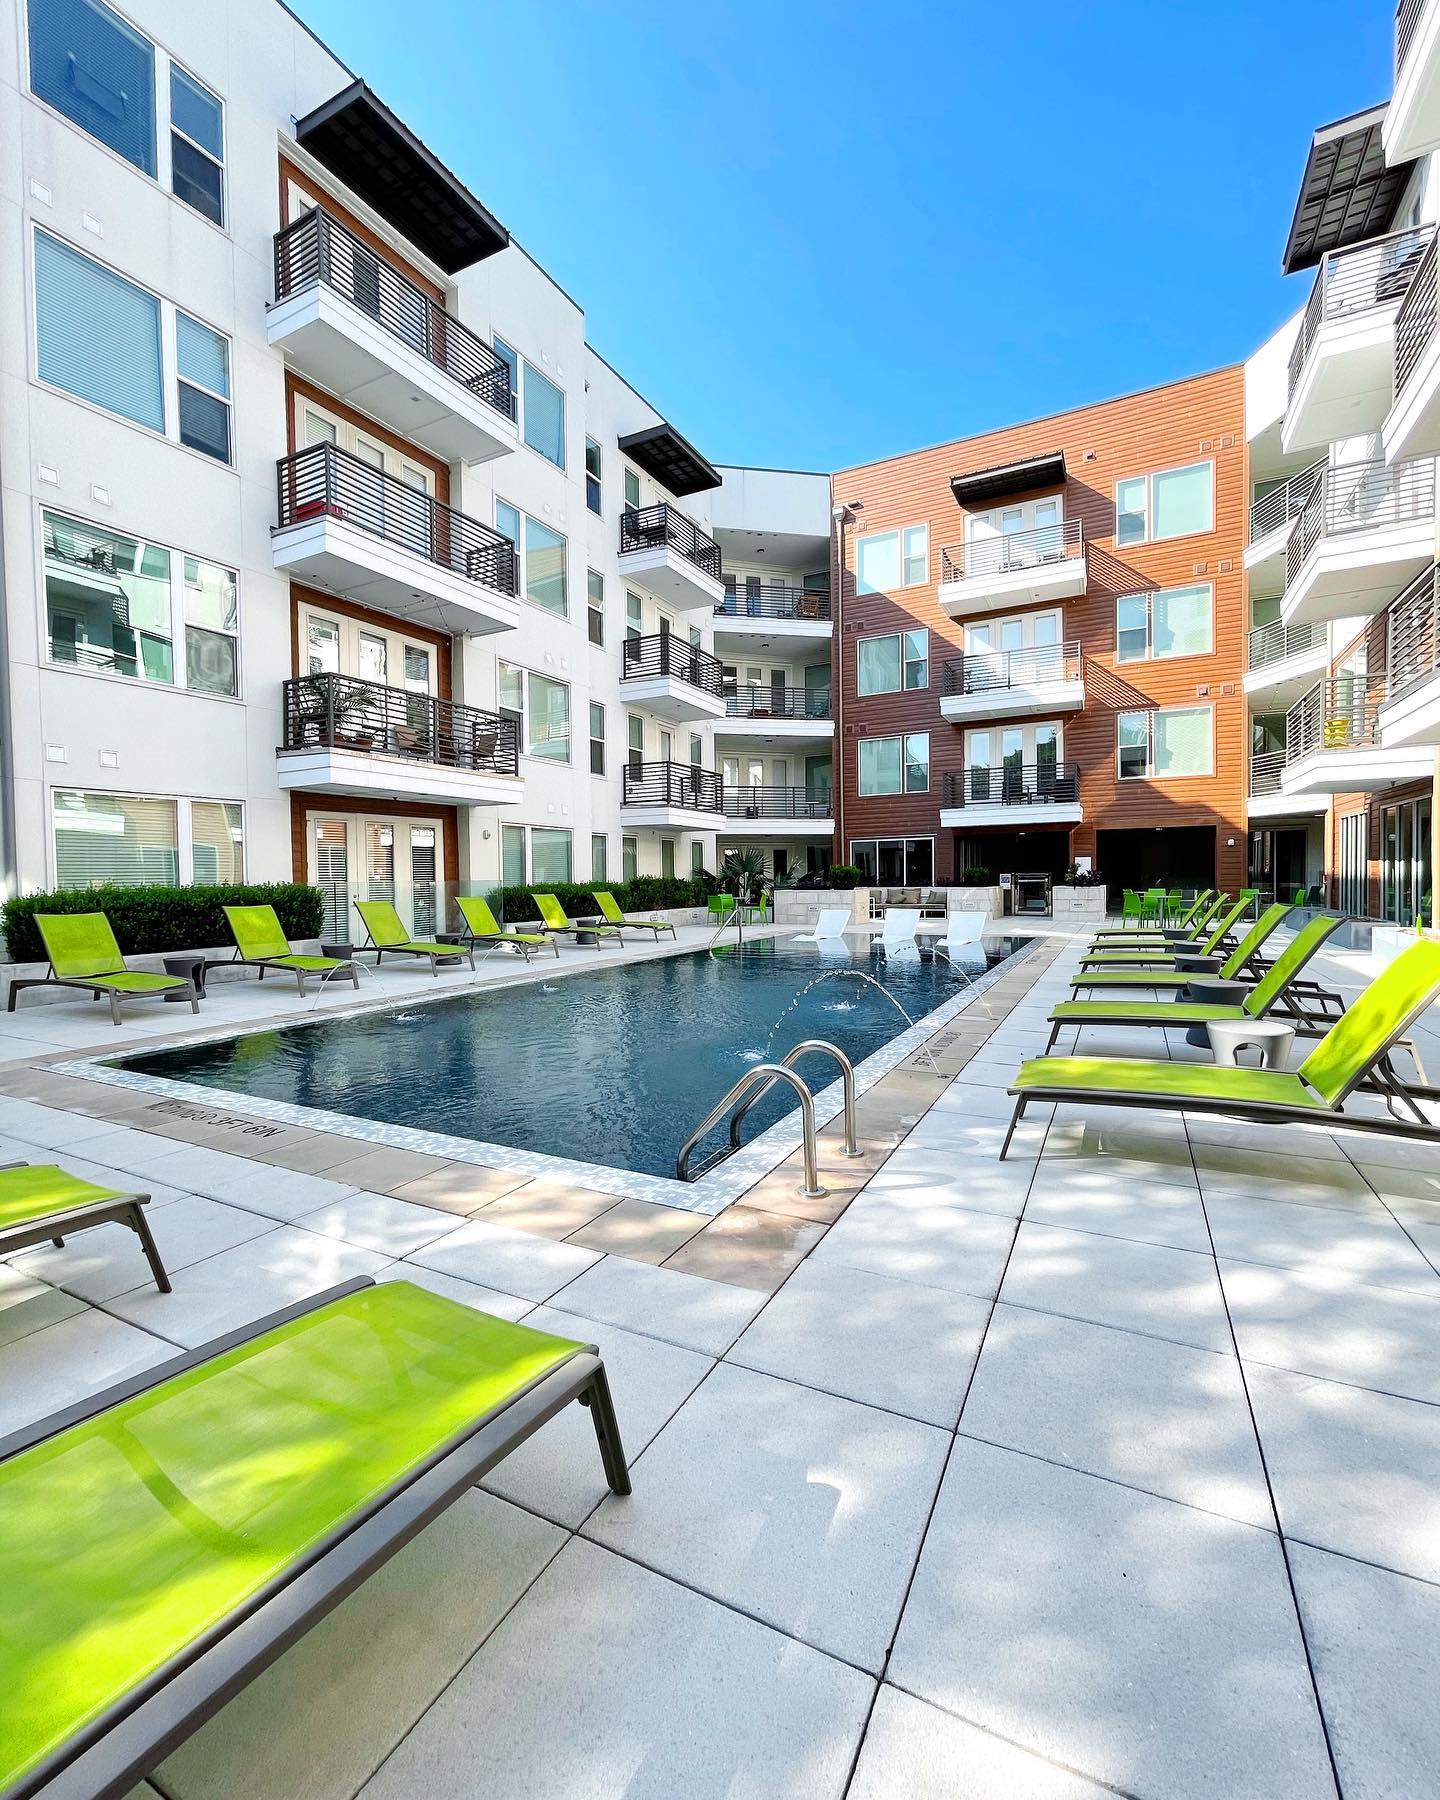 Modern apartment complex with large swimming pool and lounge chairs located in South Lamar neighborhood in Austin, TX. Photo by Instagram user @grovessouthlamar.